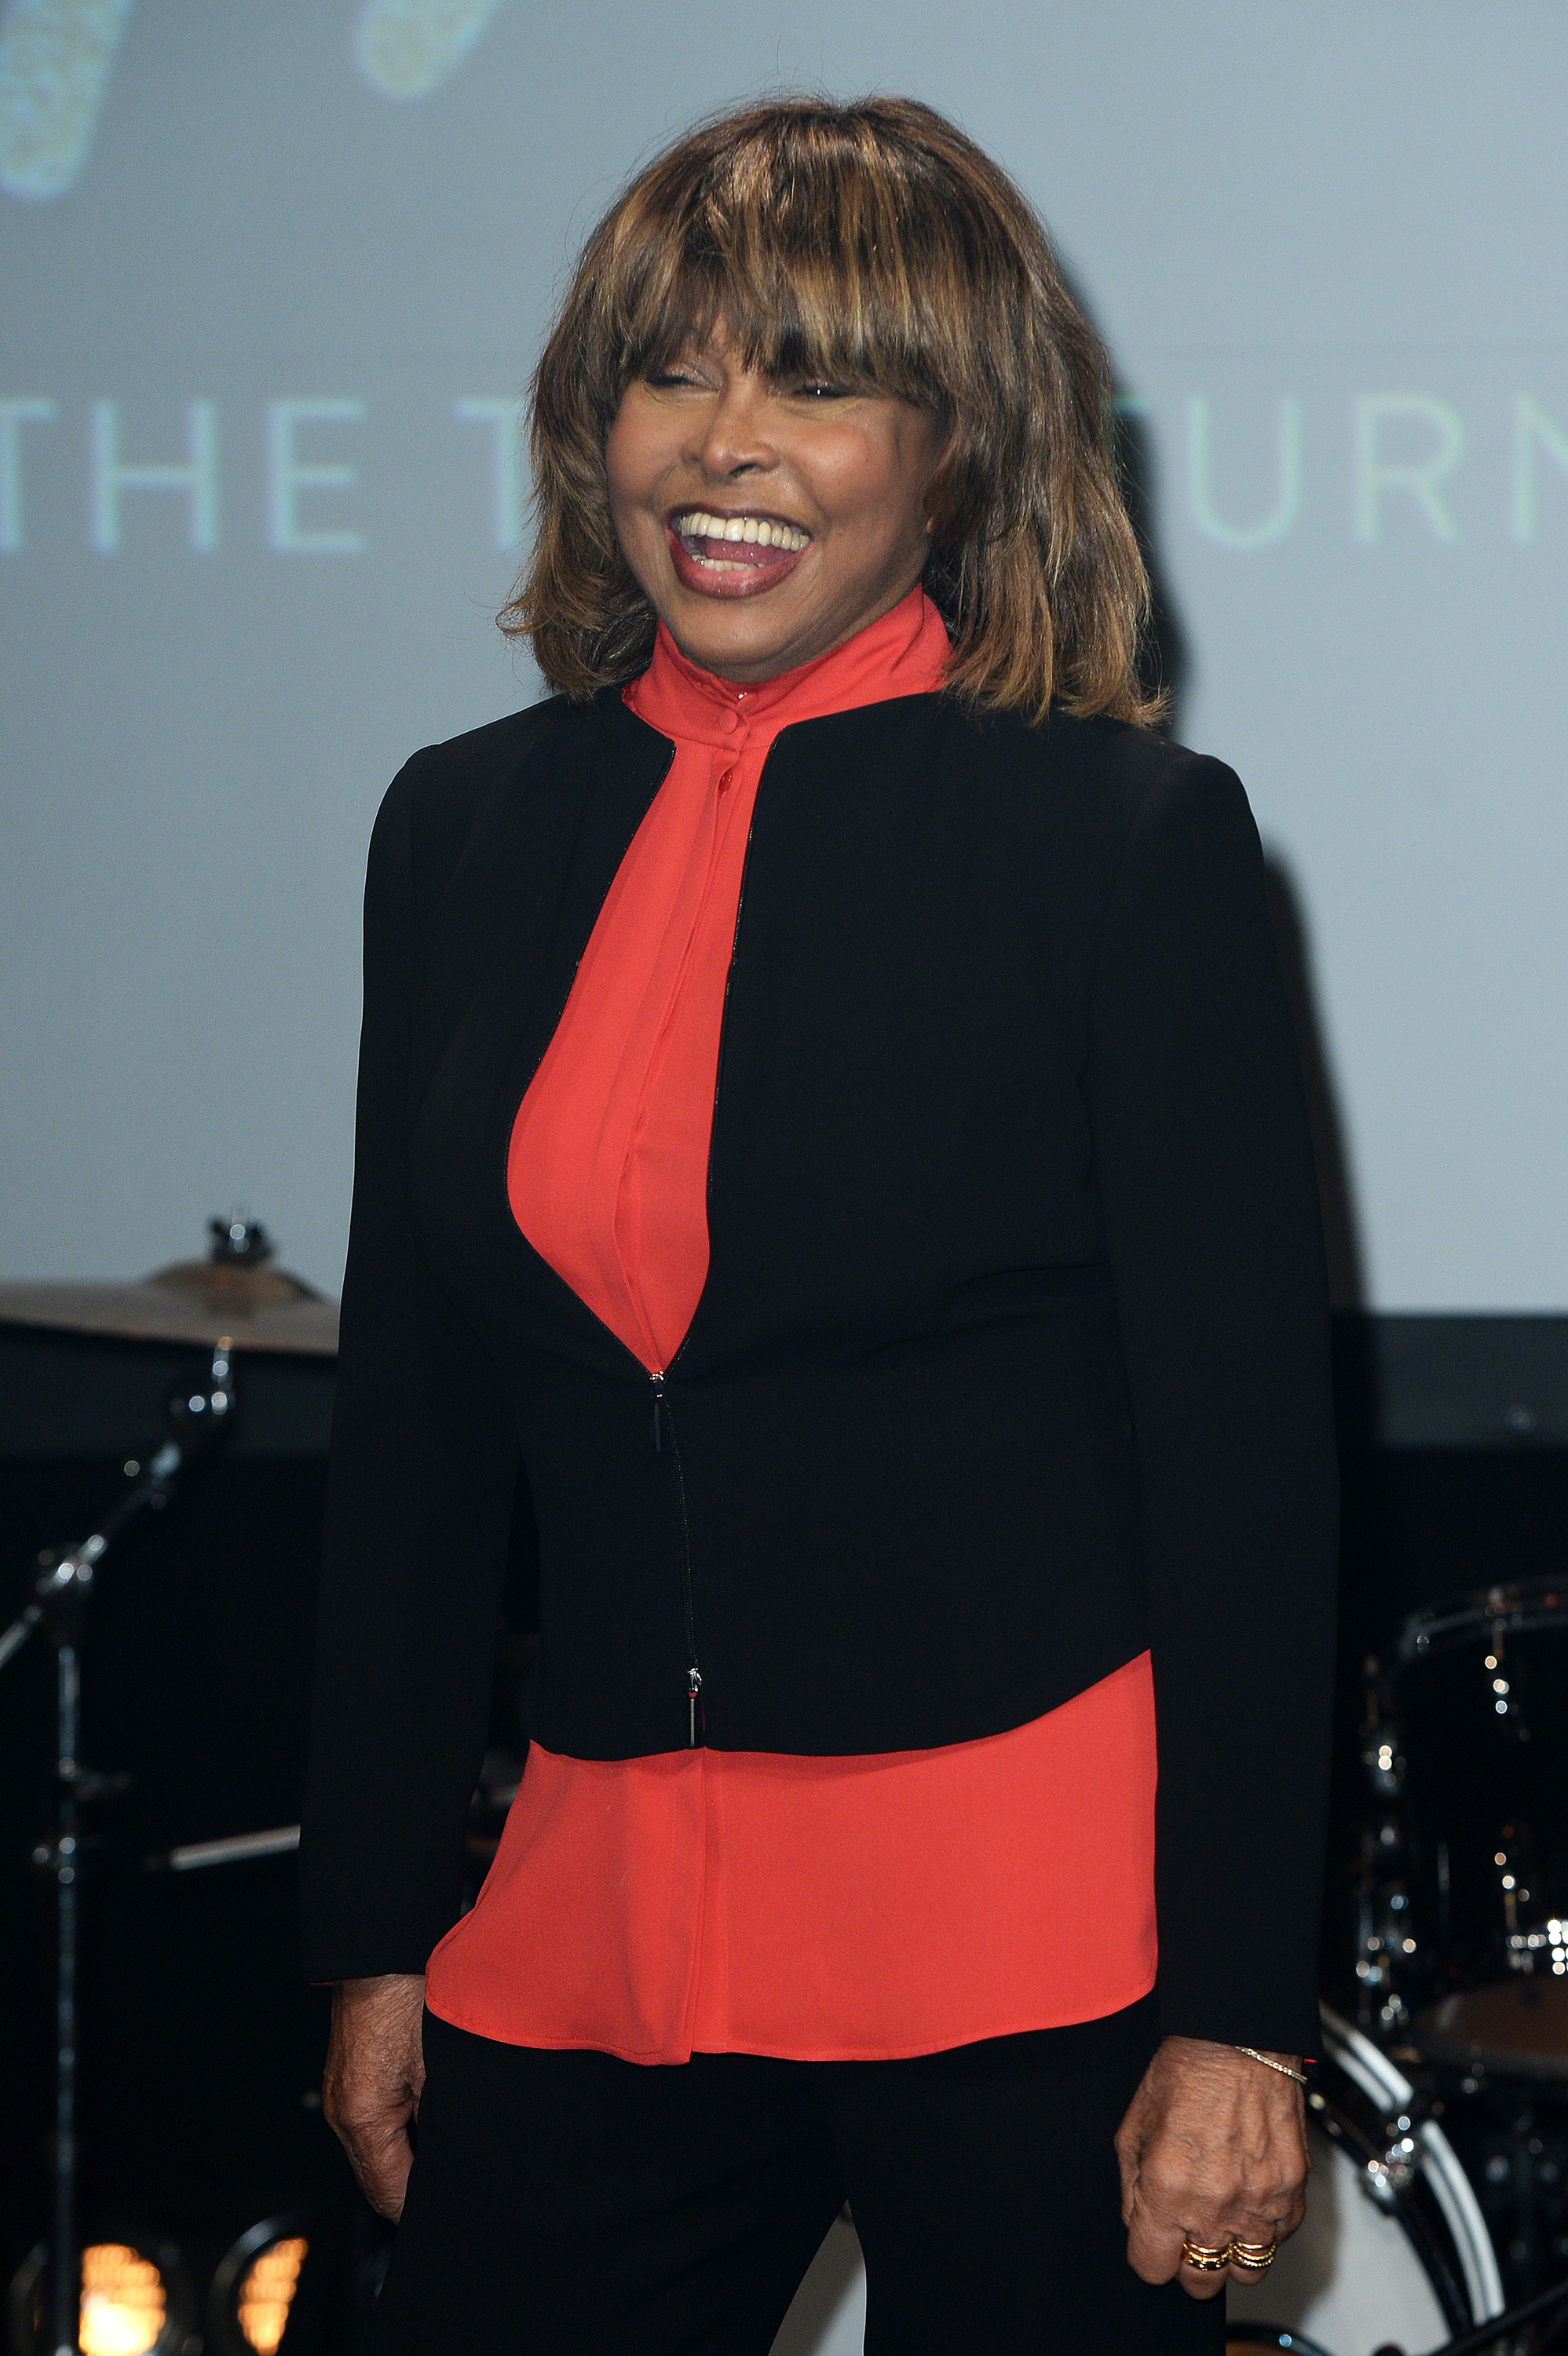 Tina Turner at the "TINA: The Tina Turner Musical" photocall at Aldwych Theatre on October 17, 2017 | Source: Getty Images